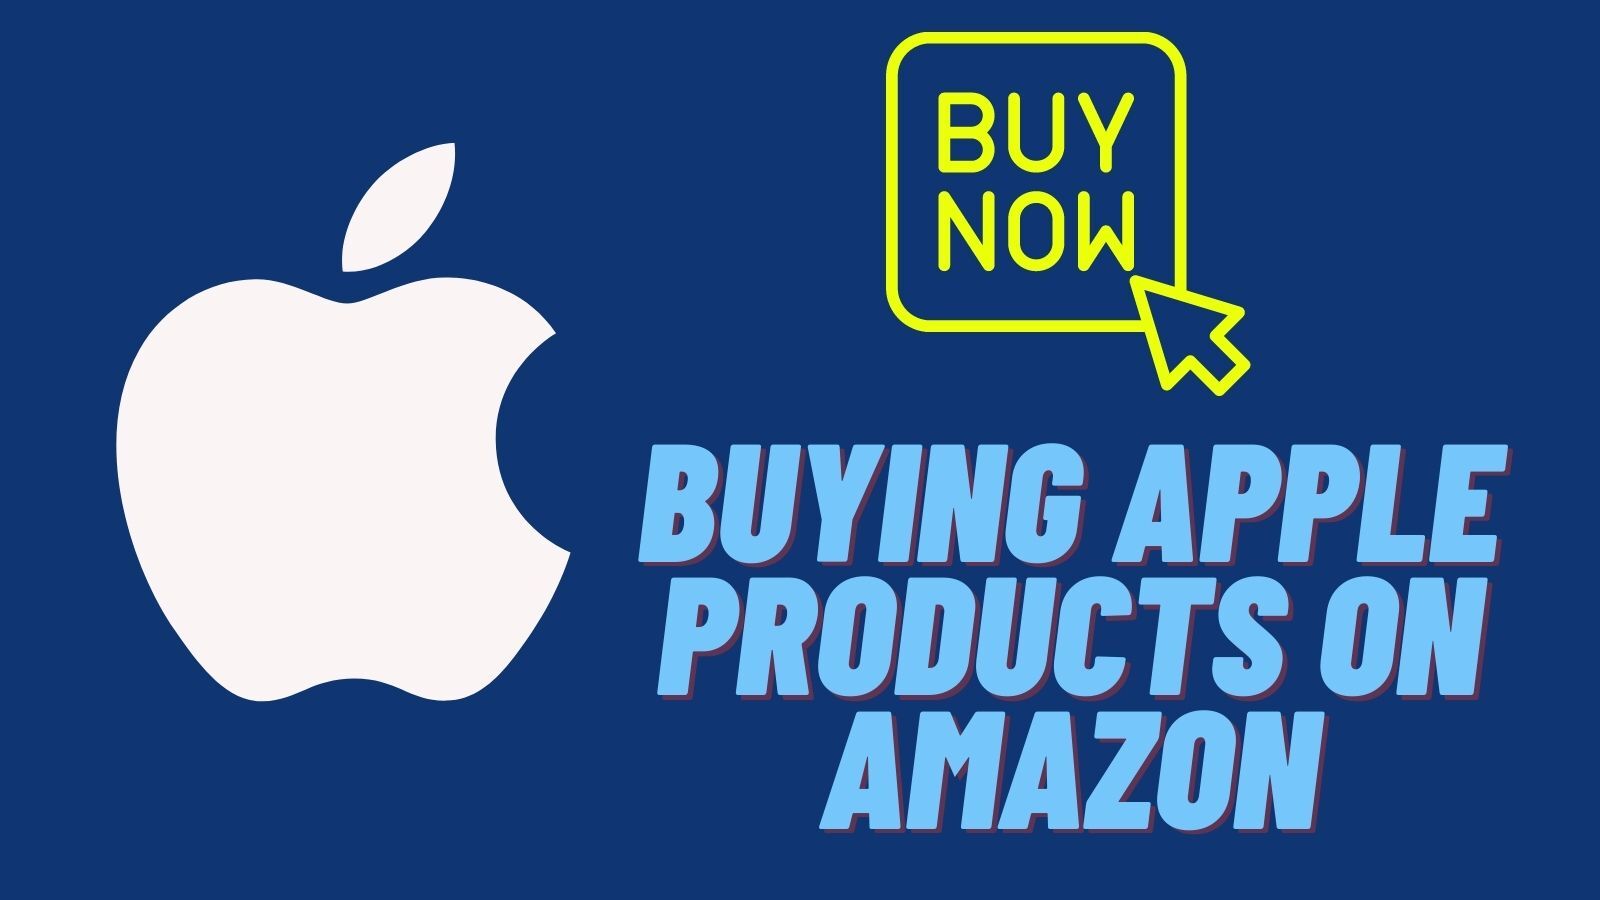 Buying Apple Products On Amazon: Is It Safe?